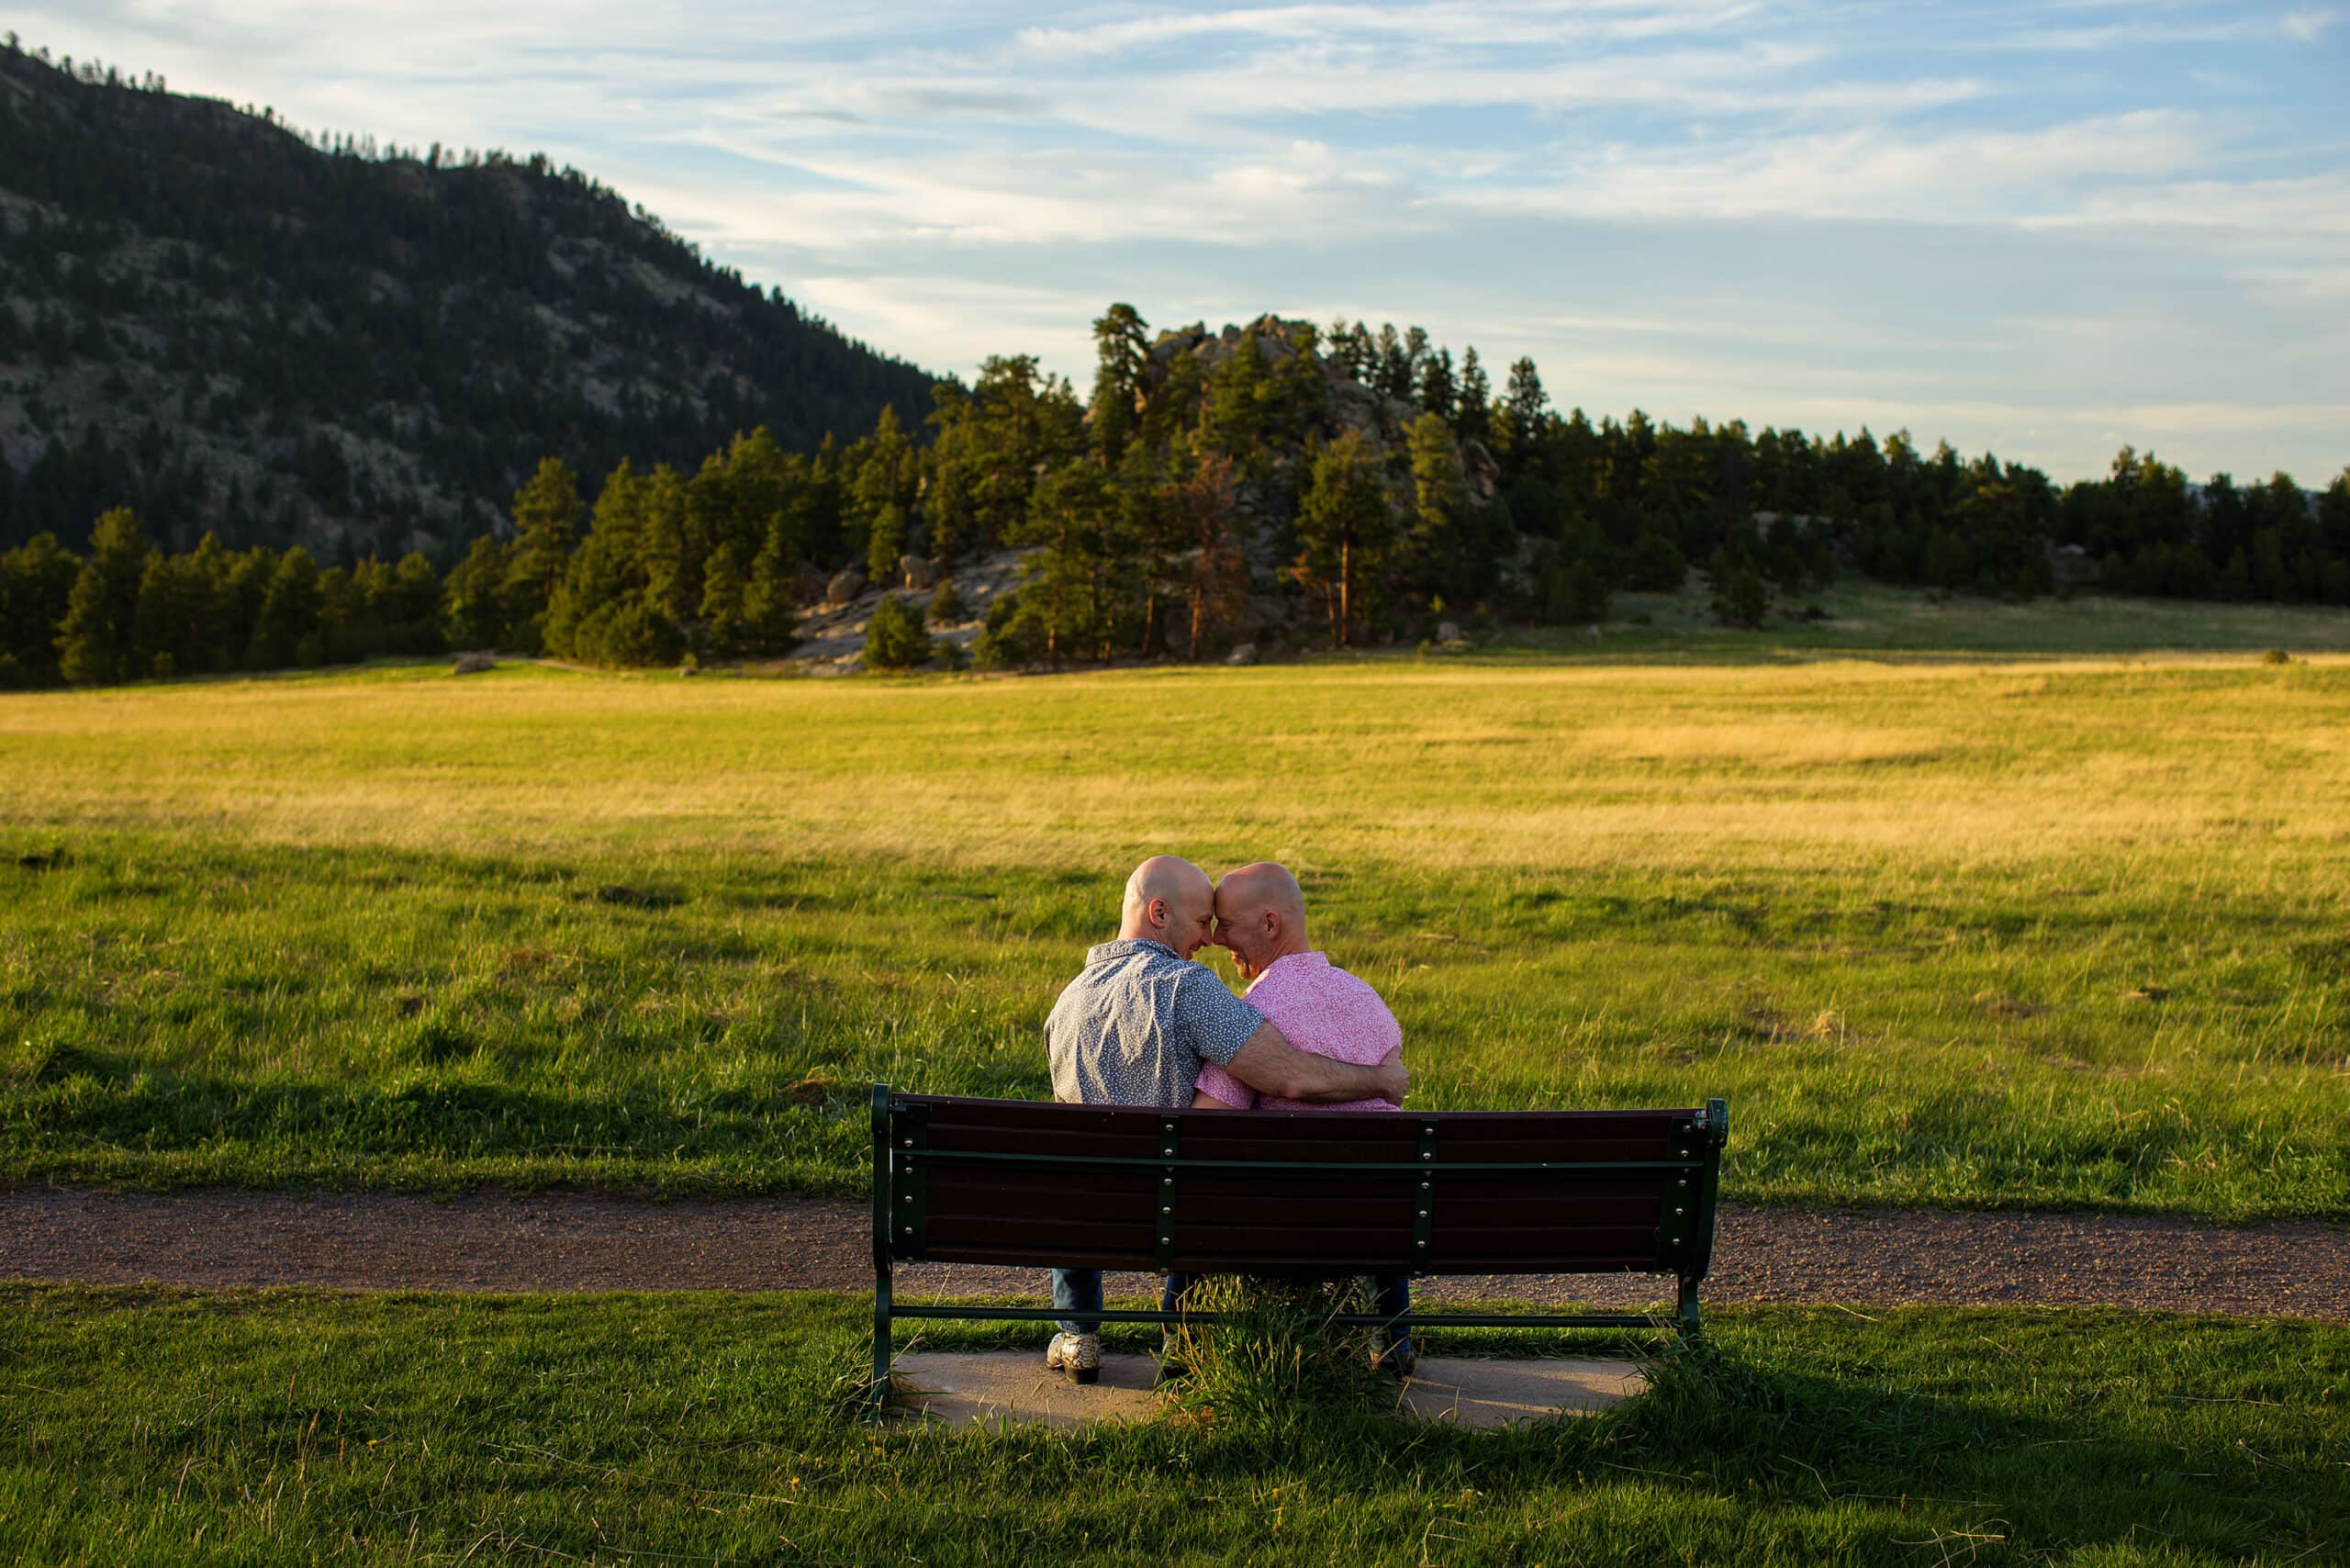 Two guys share a moment together on a bench at Alderfer Three Sisters park in Evergreen